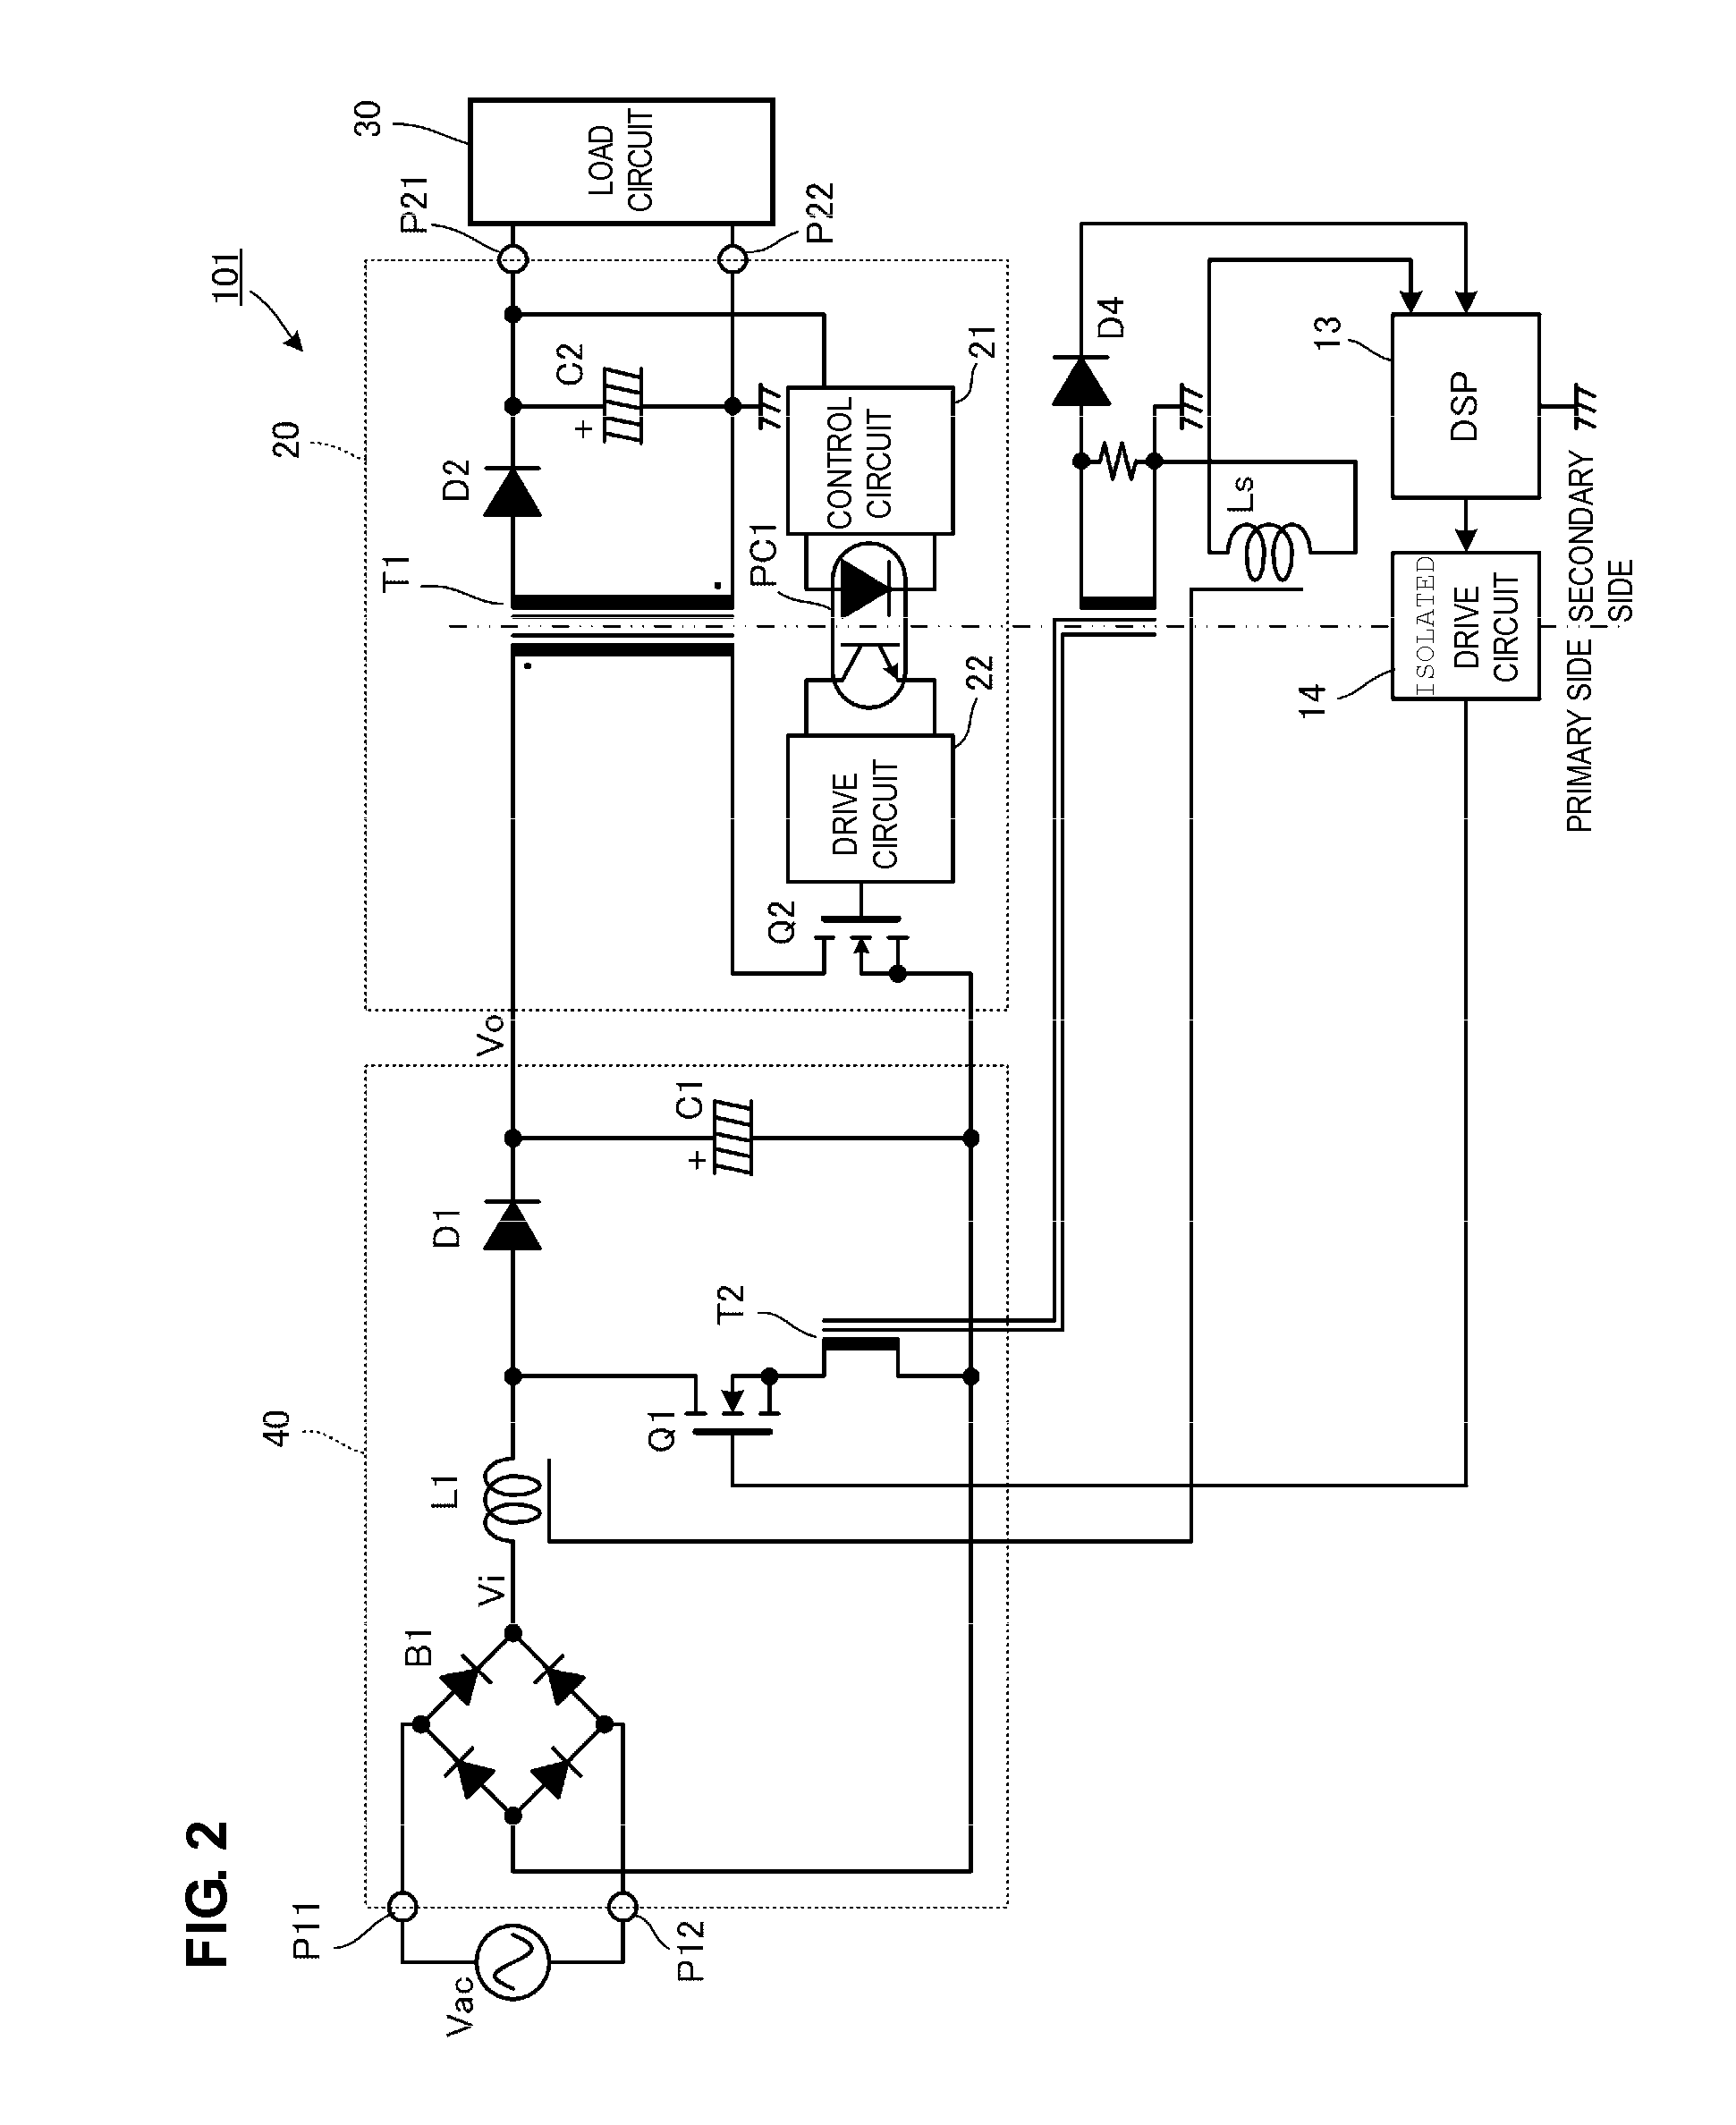 DC-DC switching power supply with power factor correction